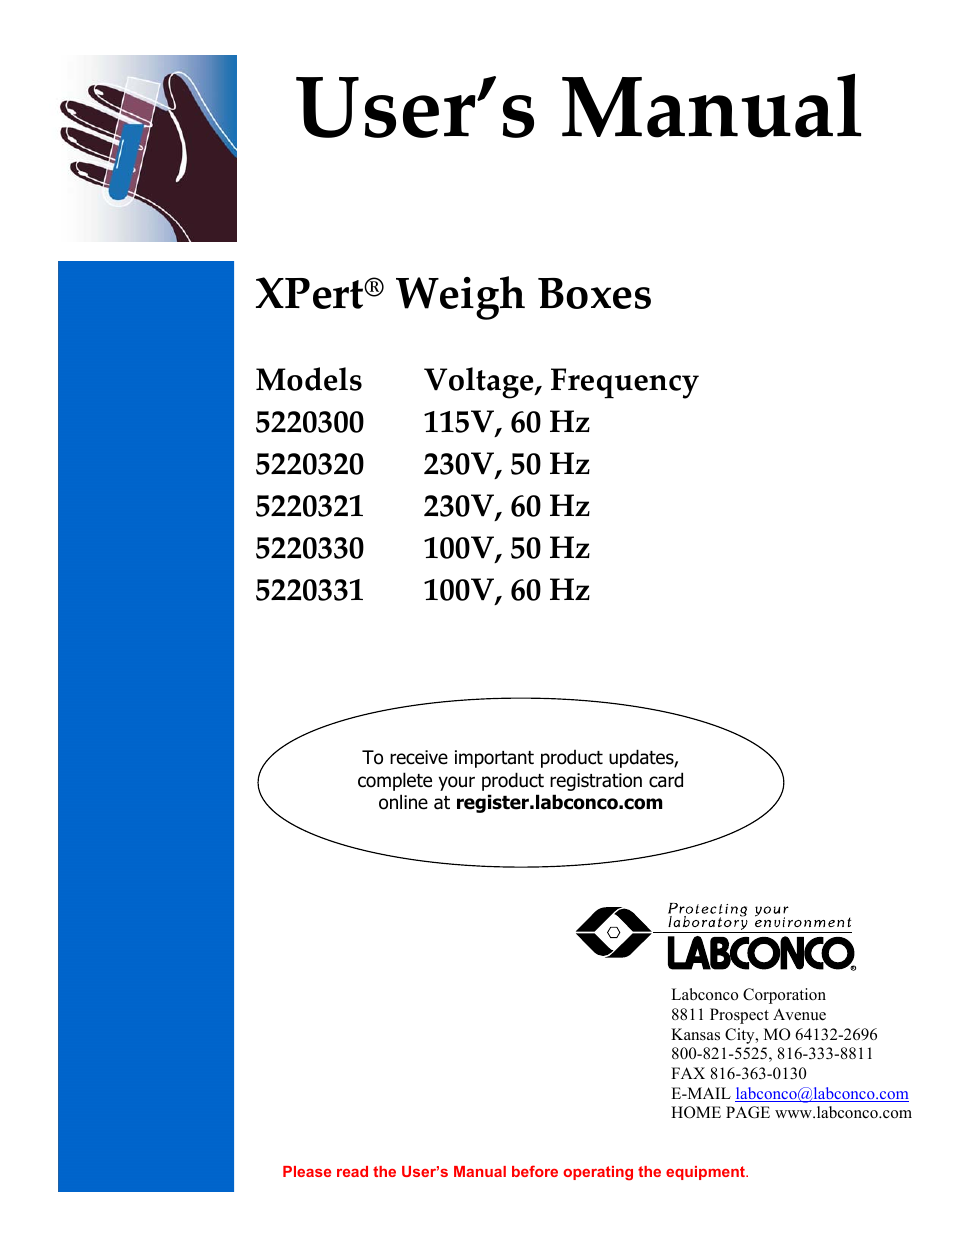 XPert Weigh Boxes 5220330